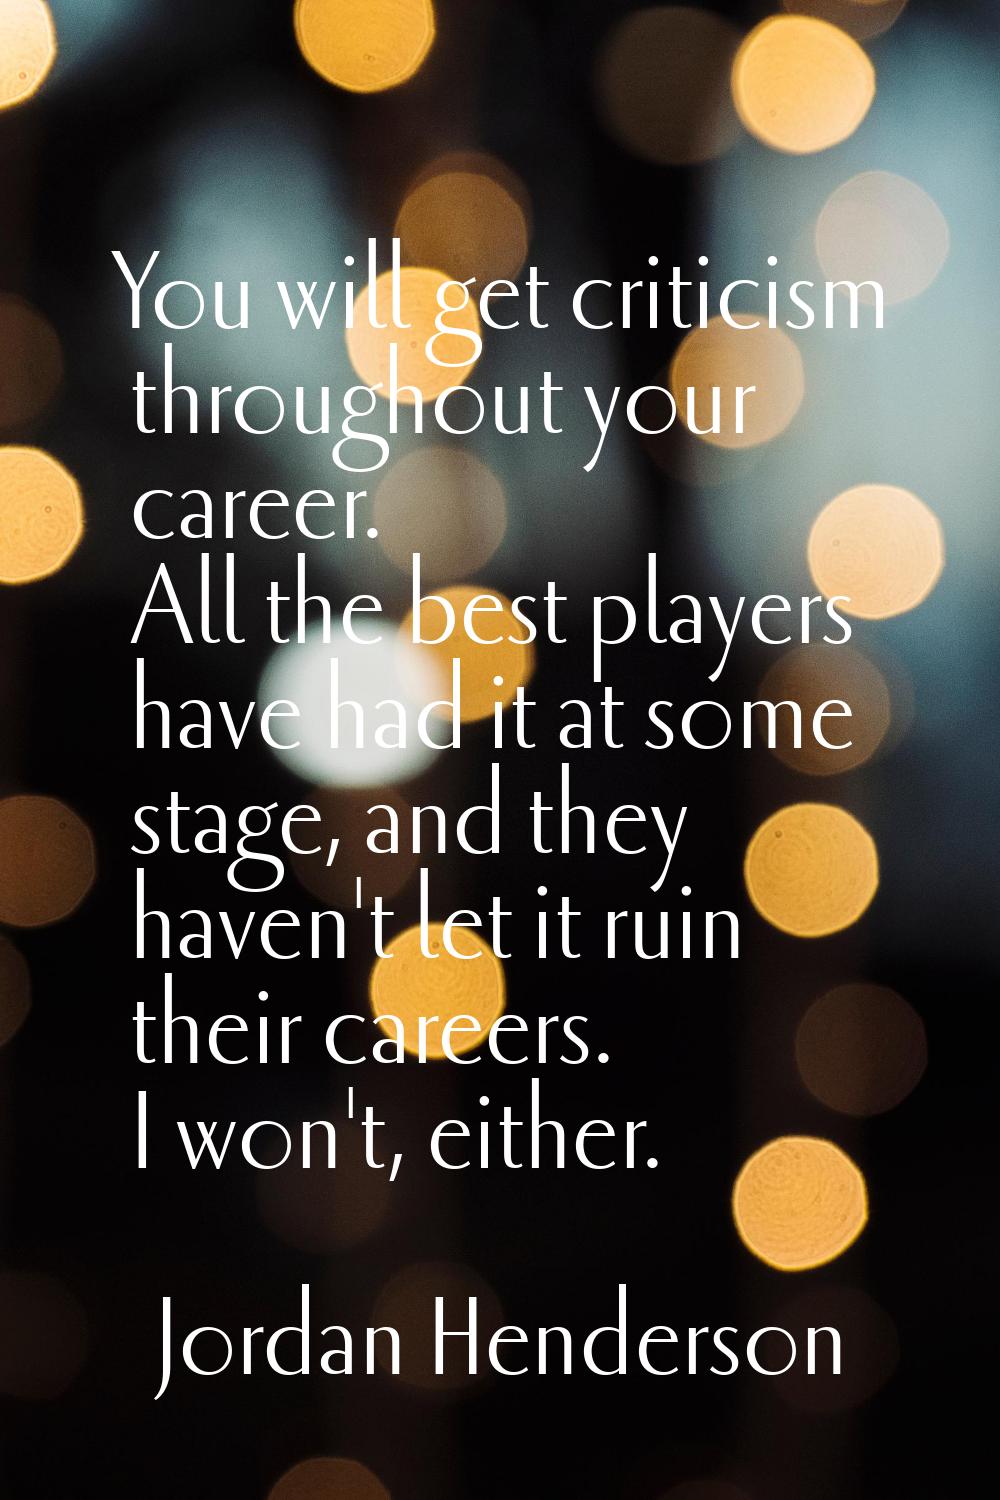 You will get criticism throughout your career. All the best players have had it at some stage, and 